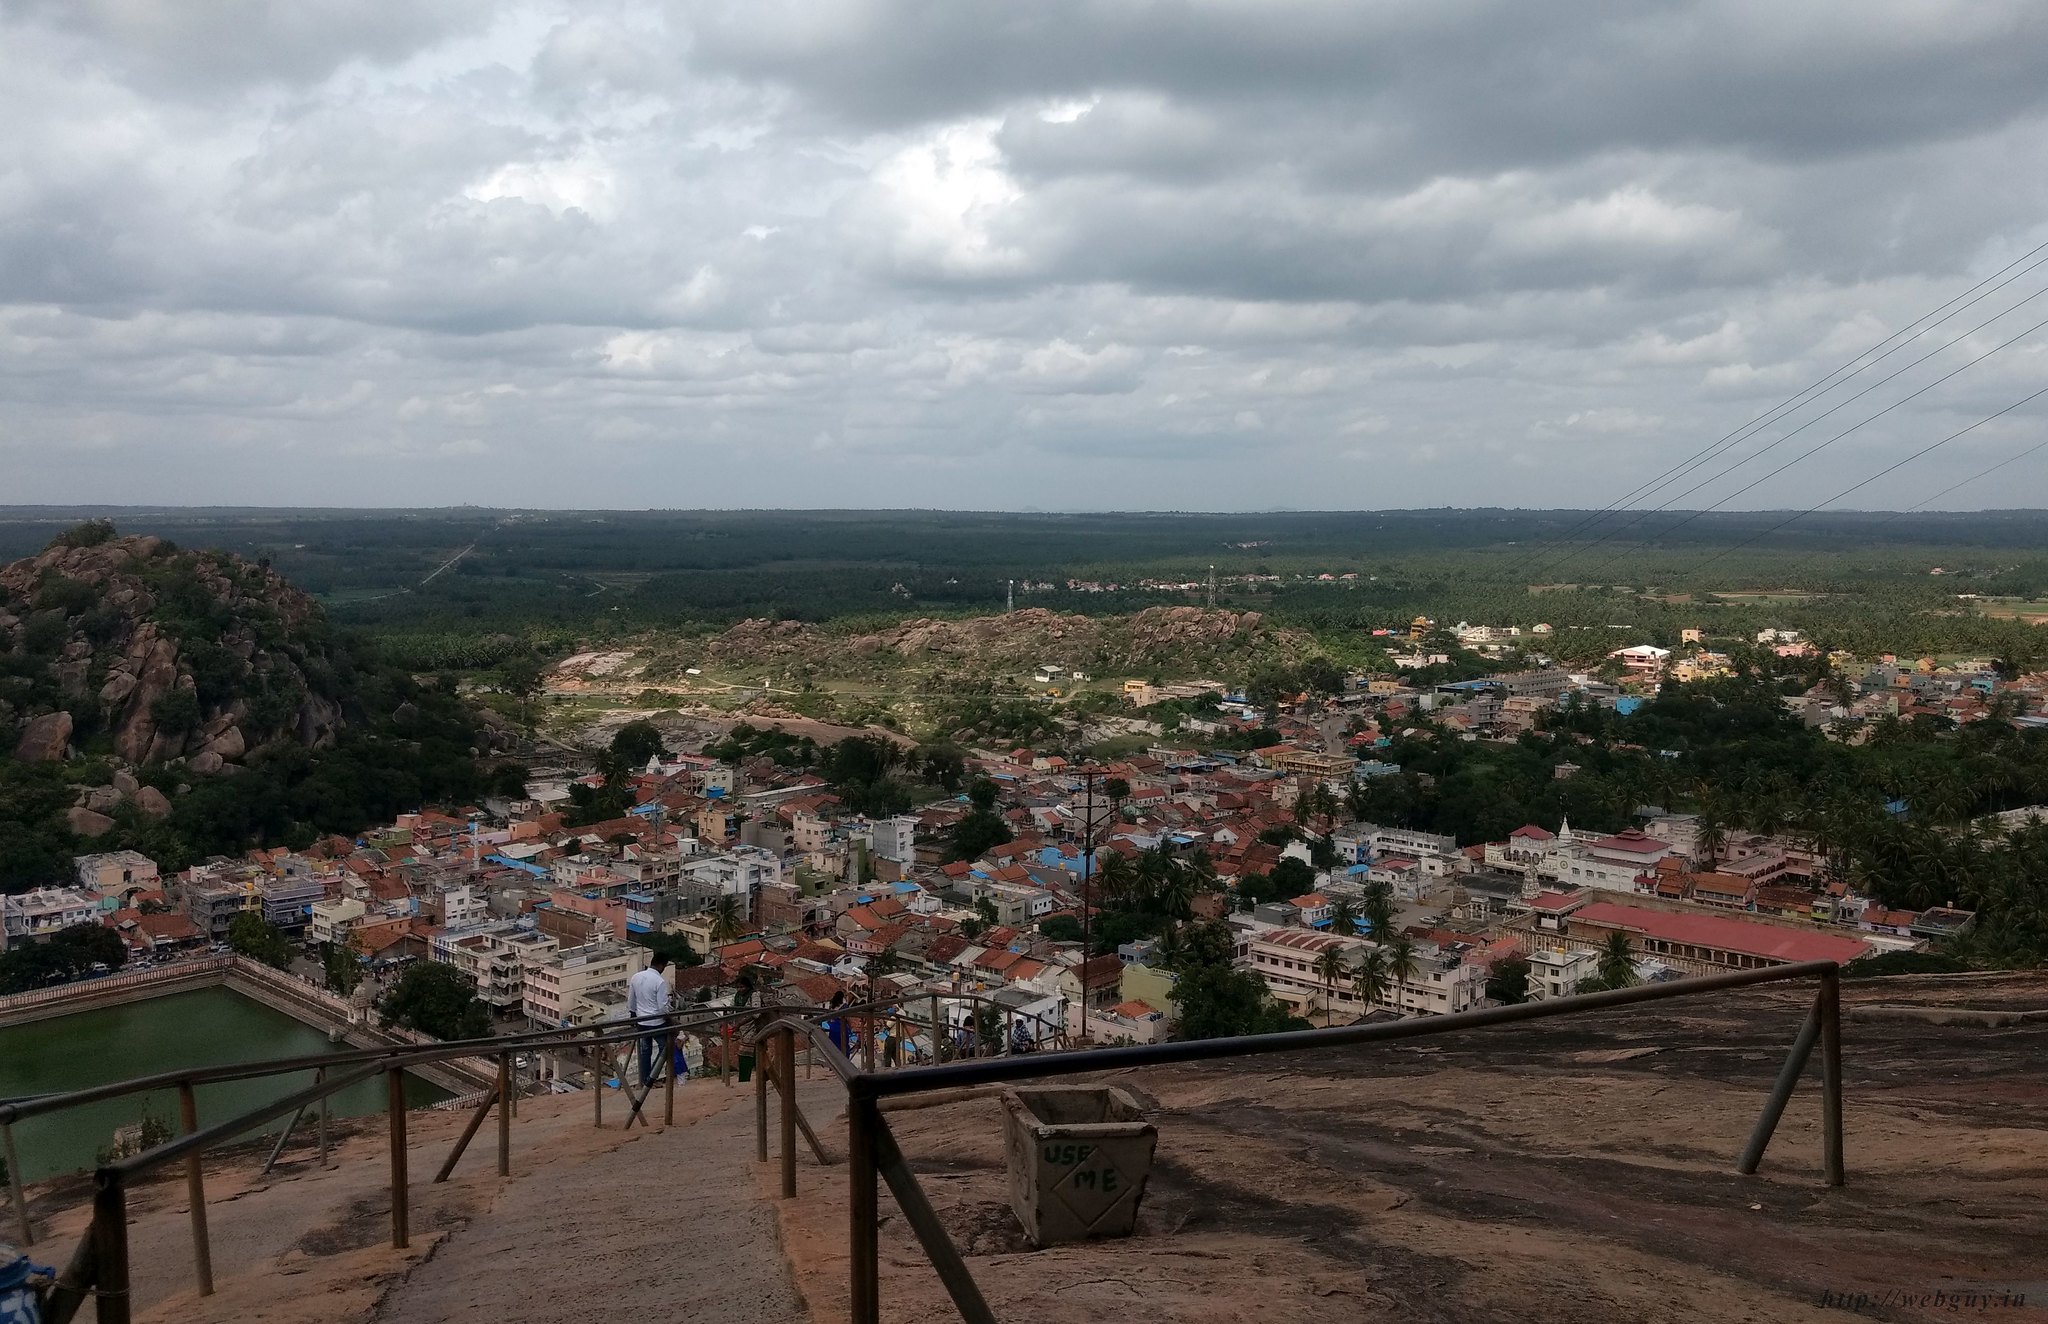 The view from atop the Vindhyagiri Hill, Sravanabelagola